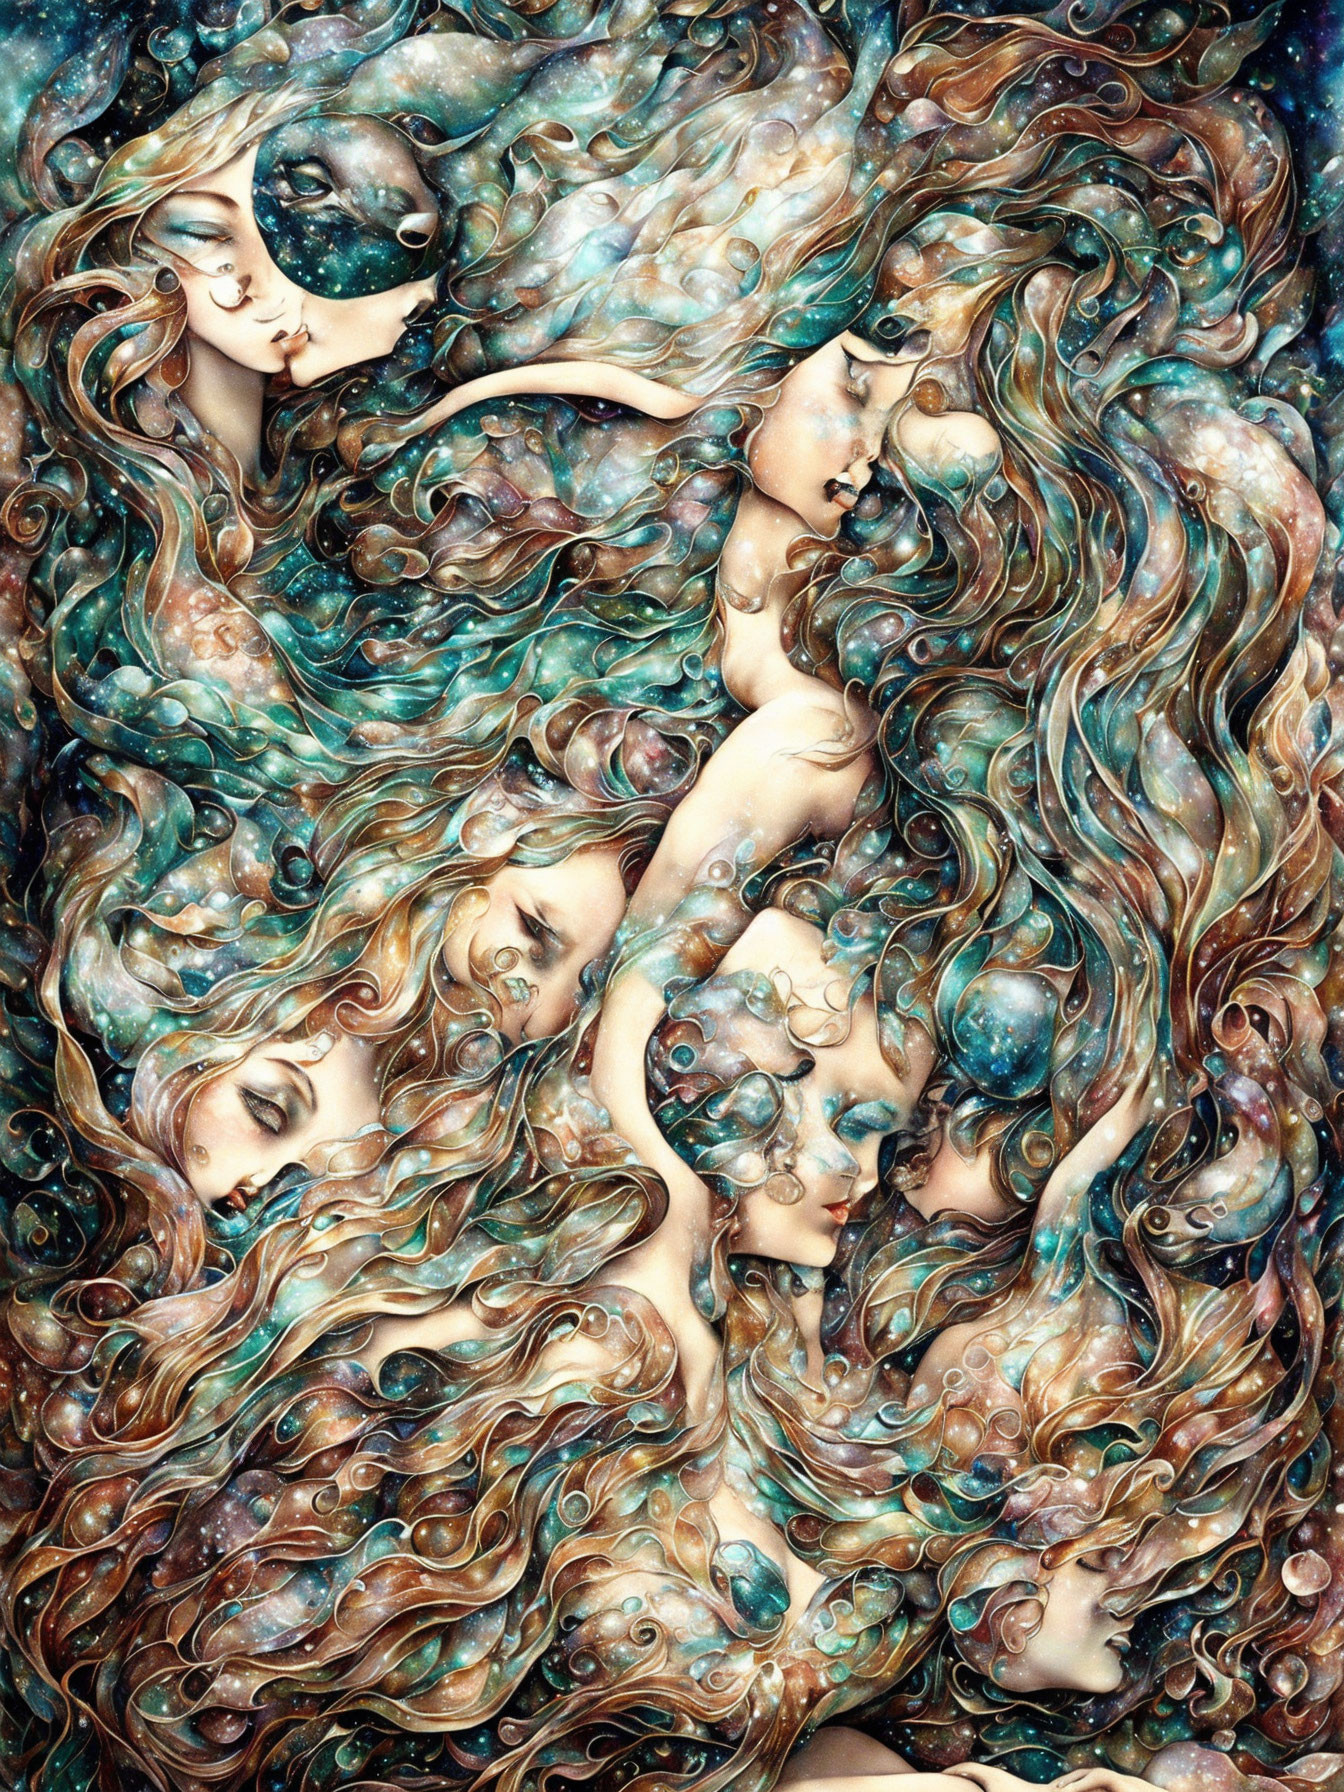 Colorful Artwork: Intertwined Women's Faces with Cosmic Elements